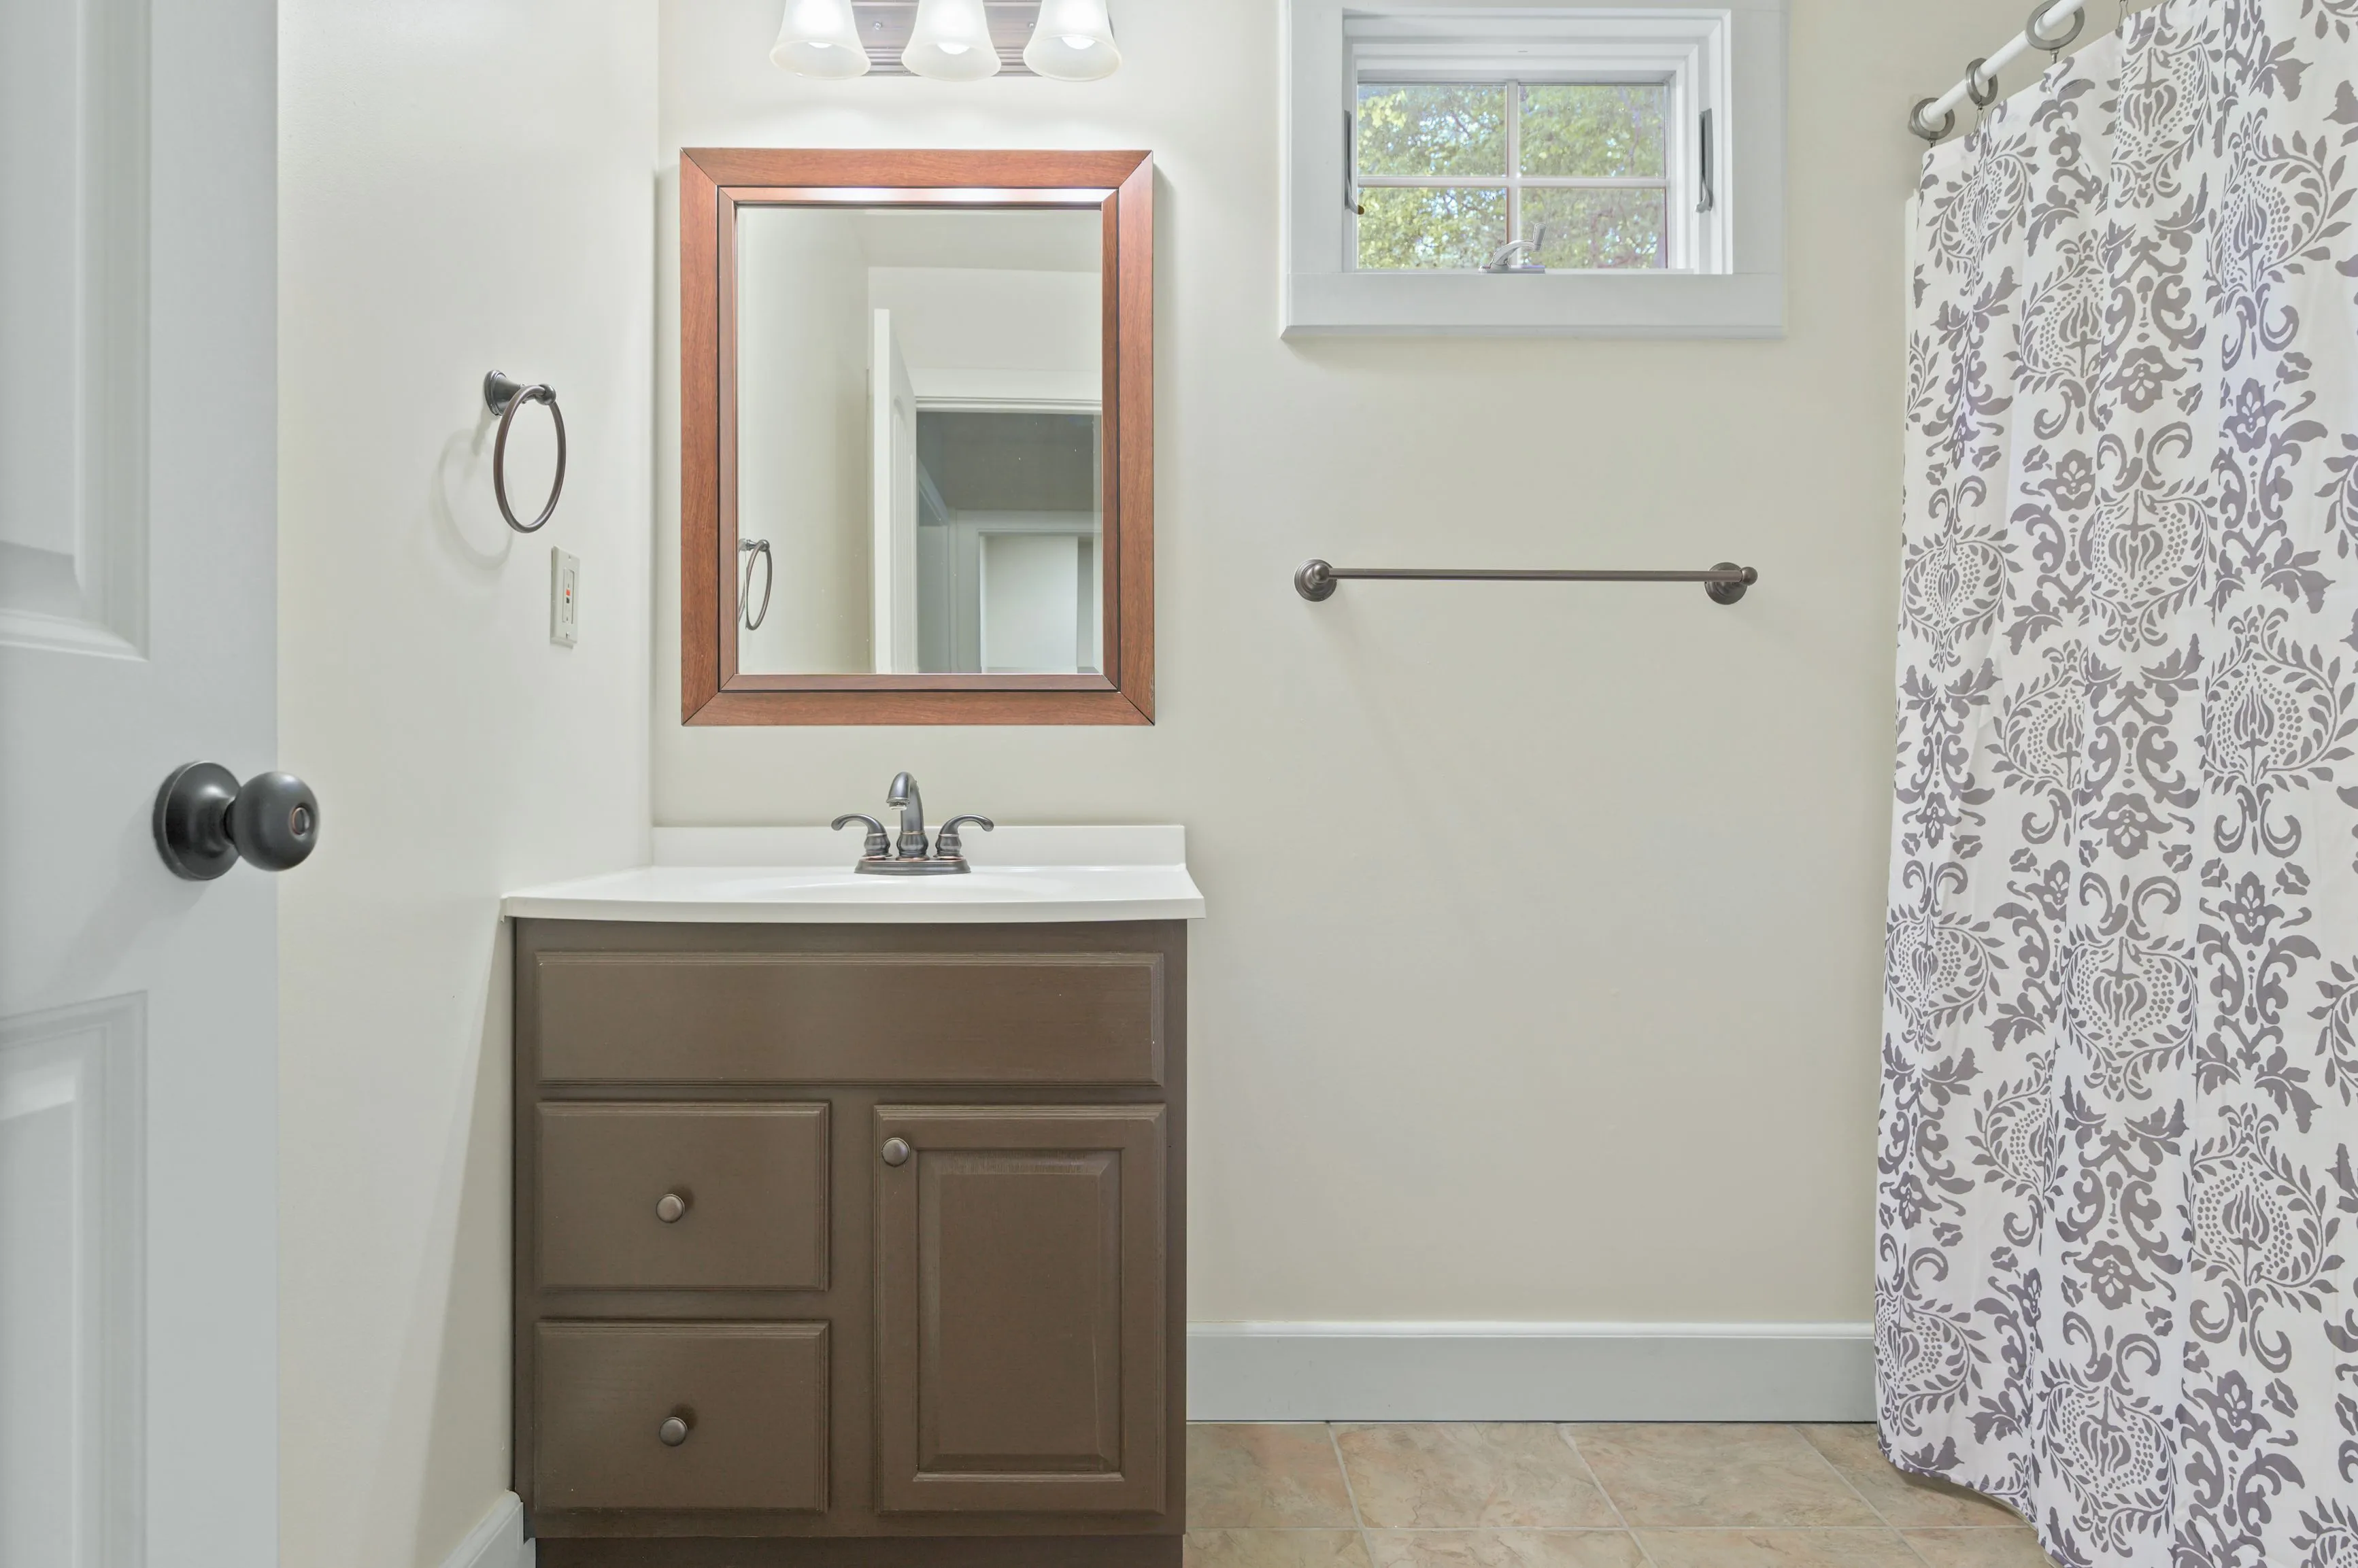 A modern bathroom with a white countertop, brown cabinets, a framed mirror, a patterned shower curtain, and a small window bringing in natural light.